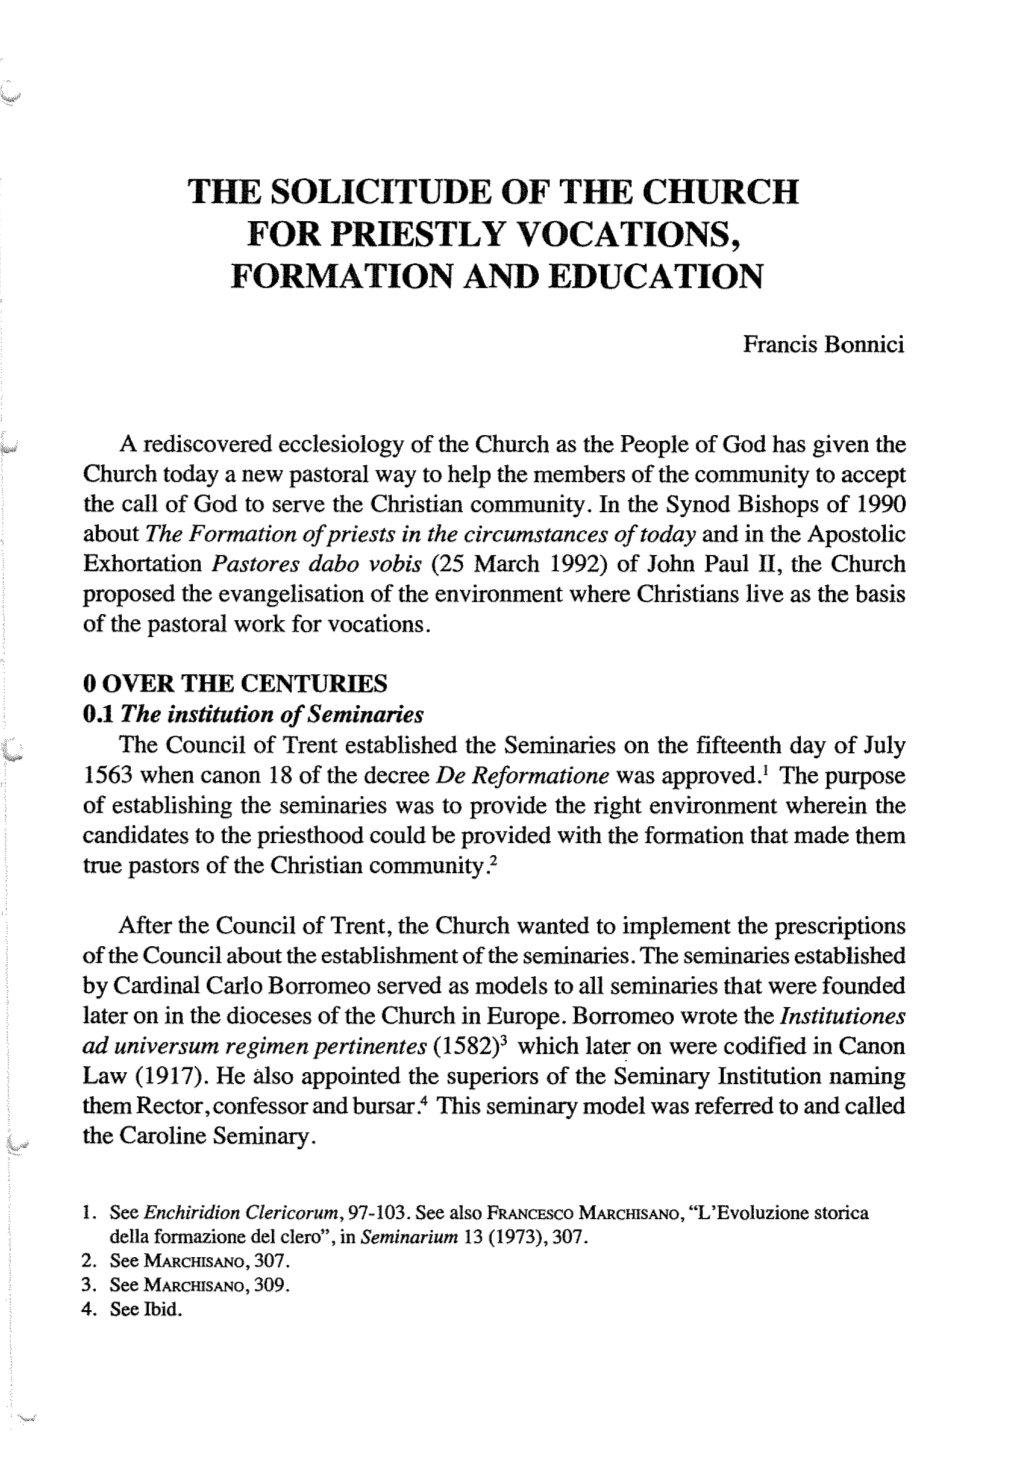 The Solicitude of the Church for Priestly Vocations, Formation and Education